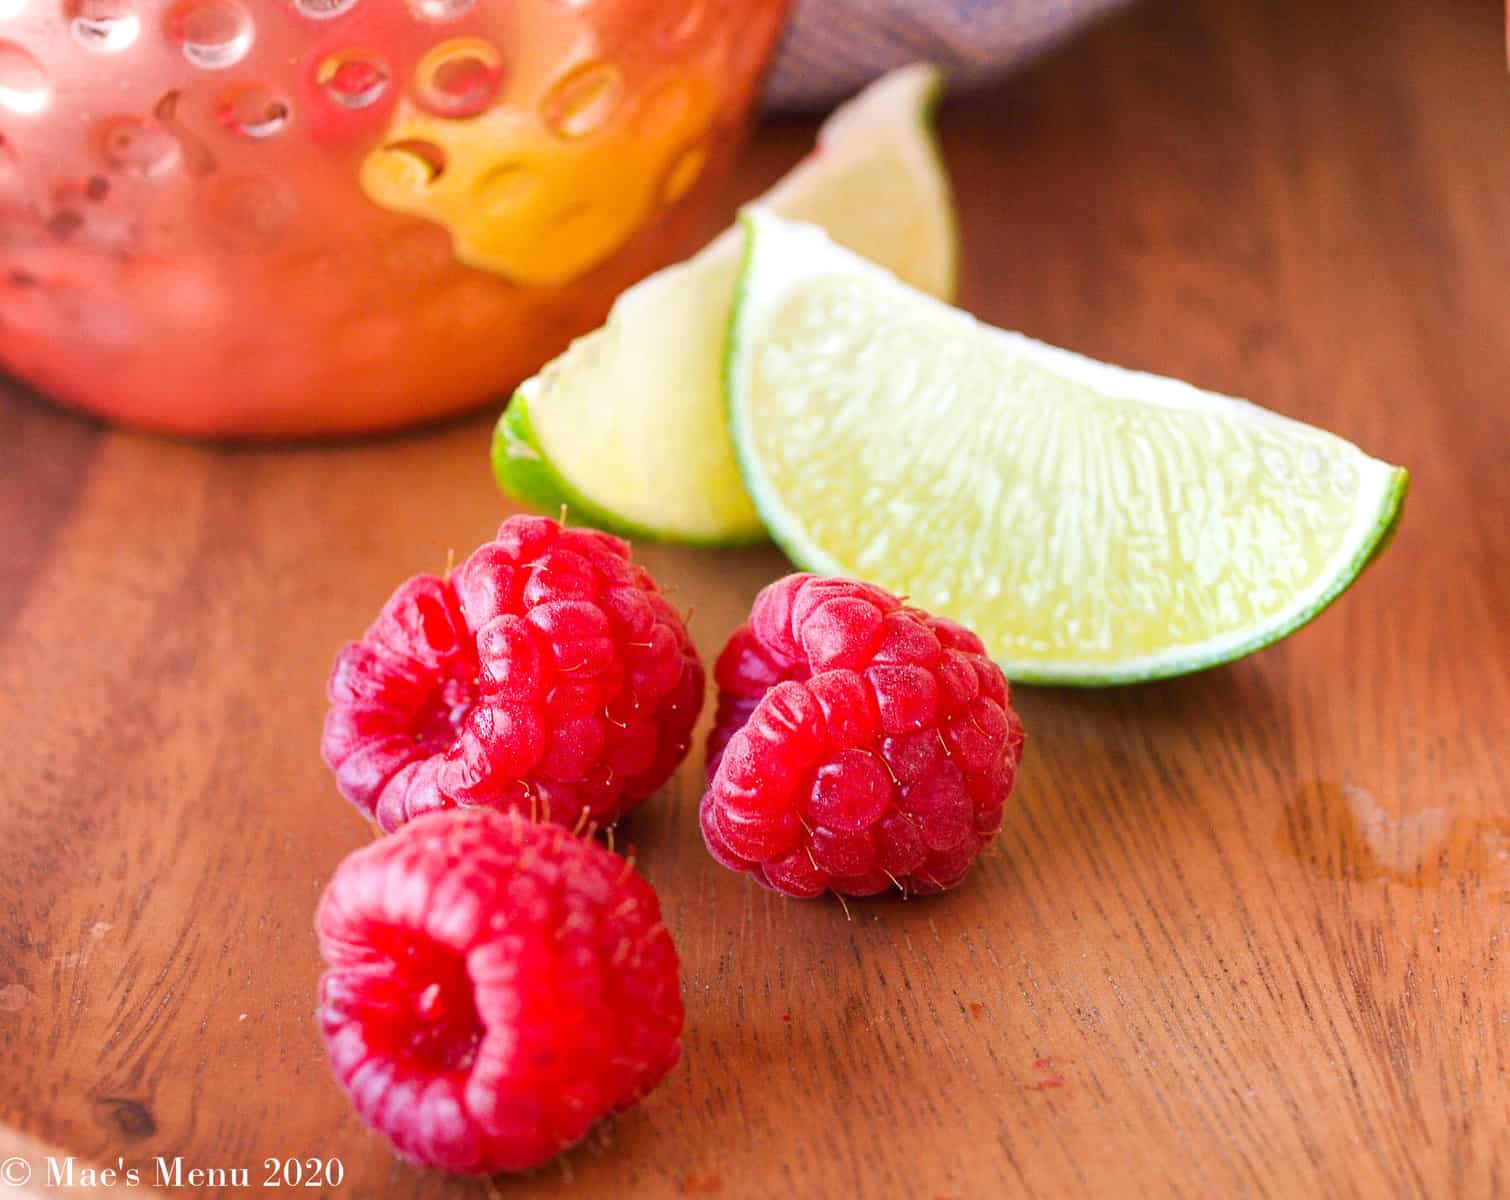 An up-close shot of fresh raspberries and lime slices on a wooden tray